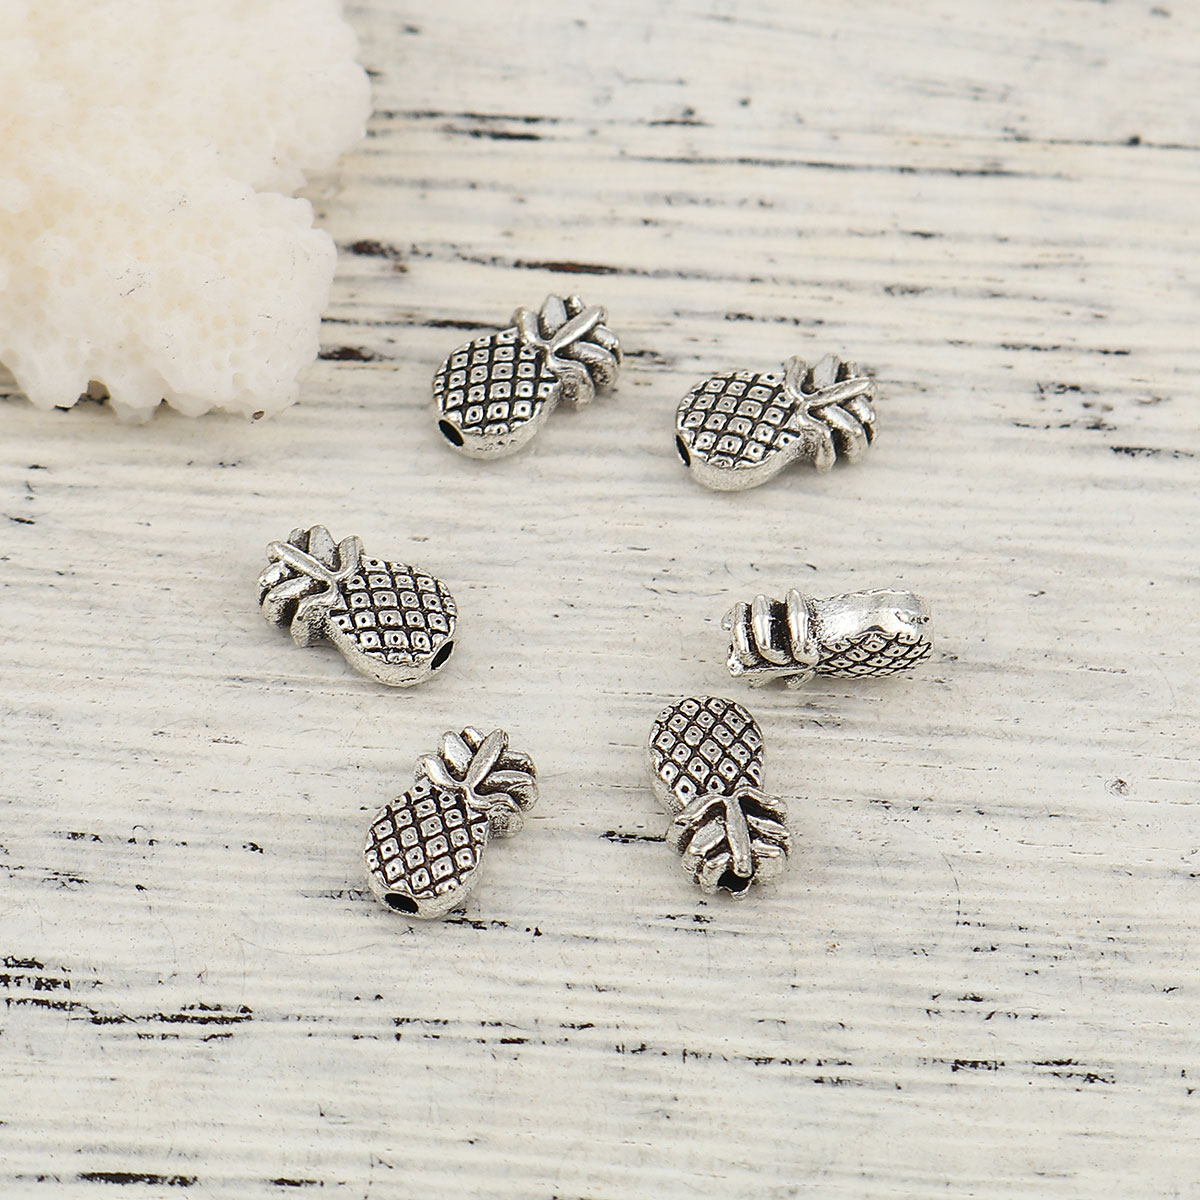 Picture of Zinc Based Alloy Spacer Beads Pineapple/ Ananas Fruit Antique Silver 10mm x 6mm, Hole: Approx 1.3mm, 100 PCs